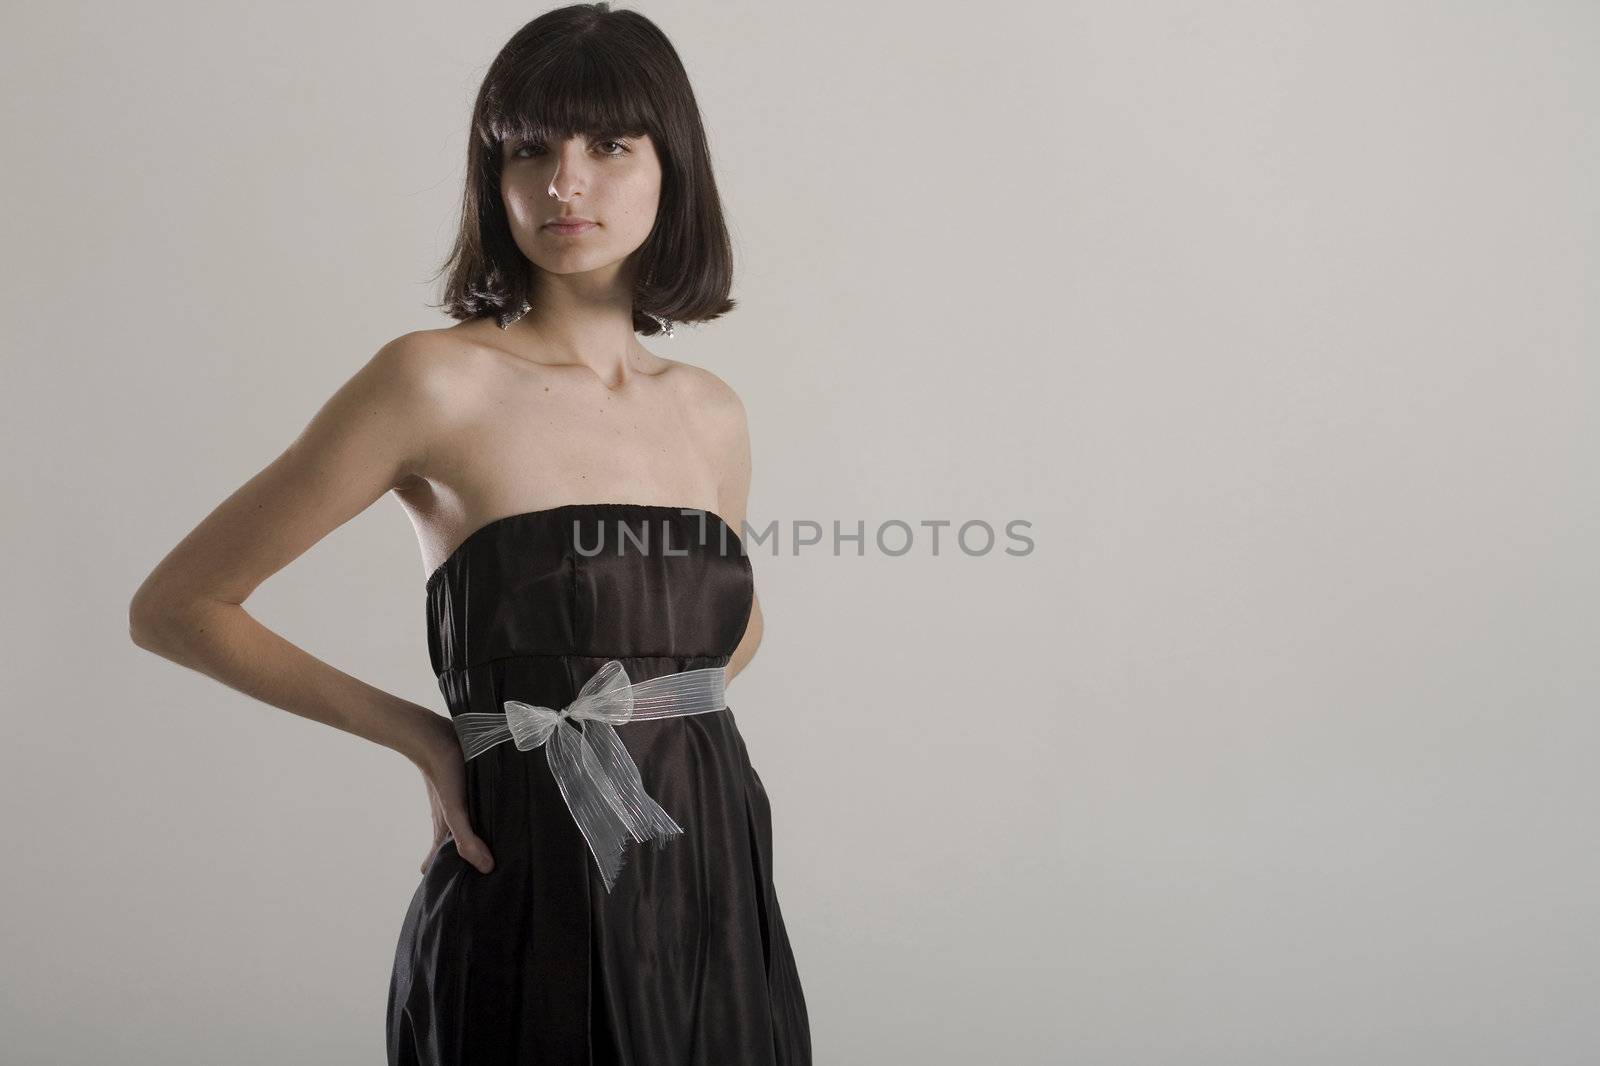 An 18 year old exotic brazilian model, with short dark hair, a young looking face and a skinny body. This was shot in a studio and she's weariing a black, strapless dress. Plenty of copyspace in the image.